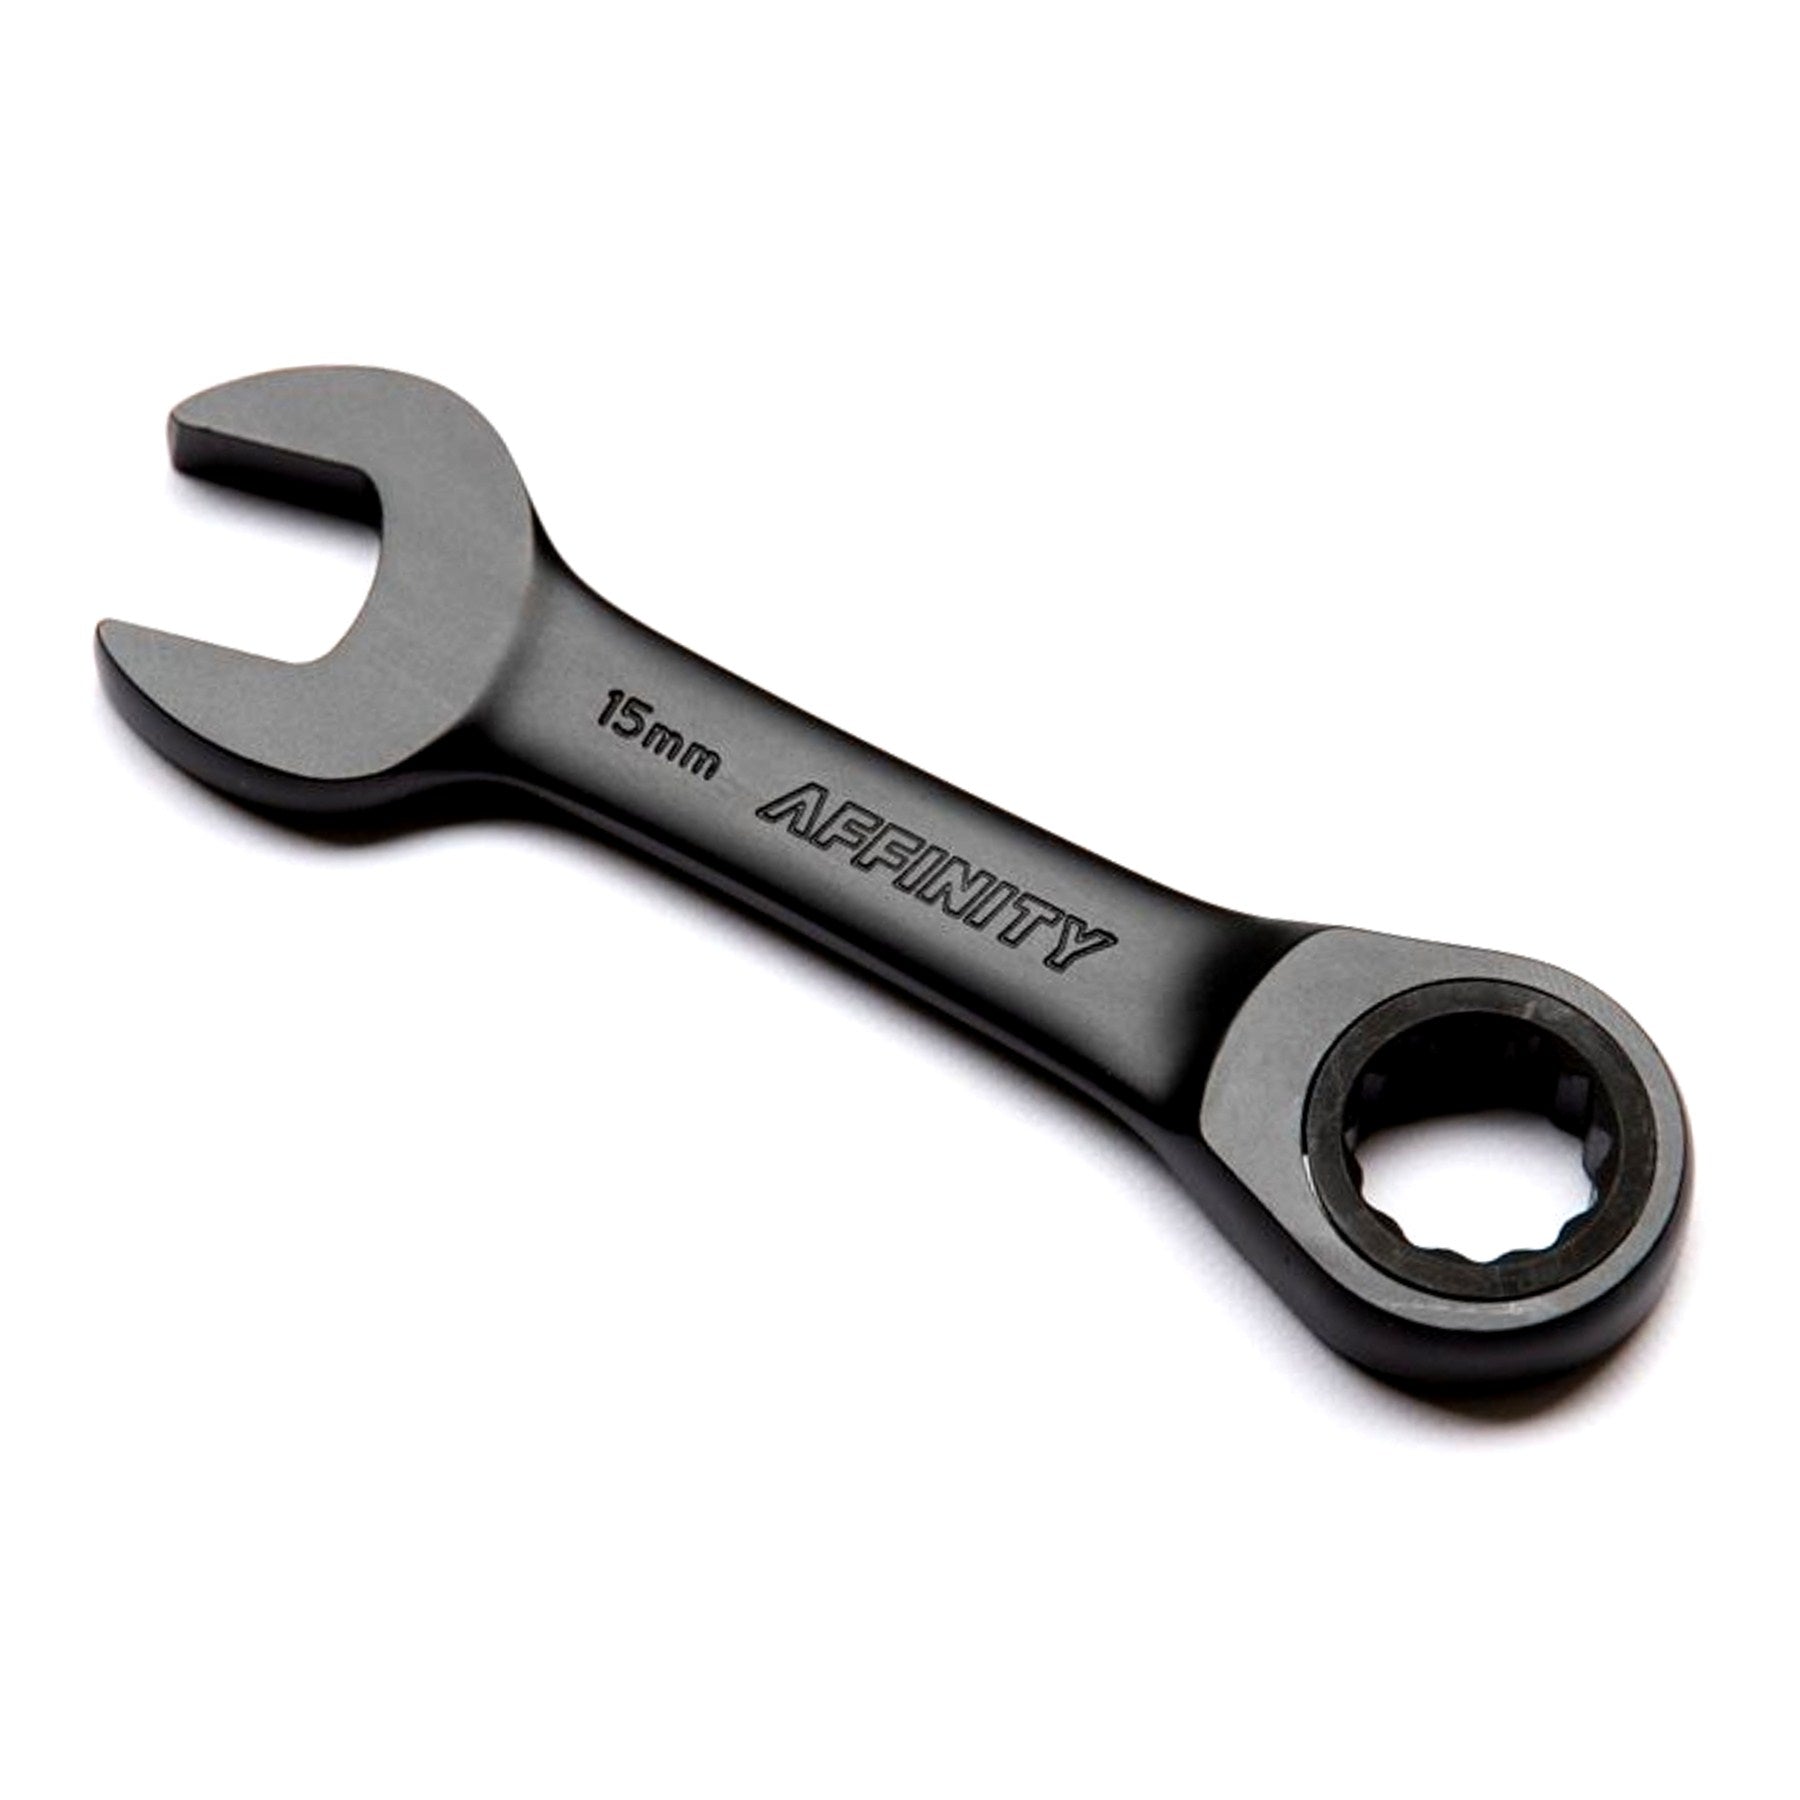 Affinity short 15mm ratcheting combination wrench - Retrogression Fixed Gear